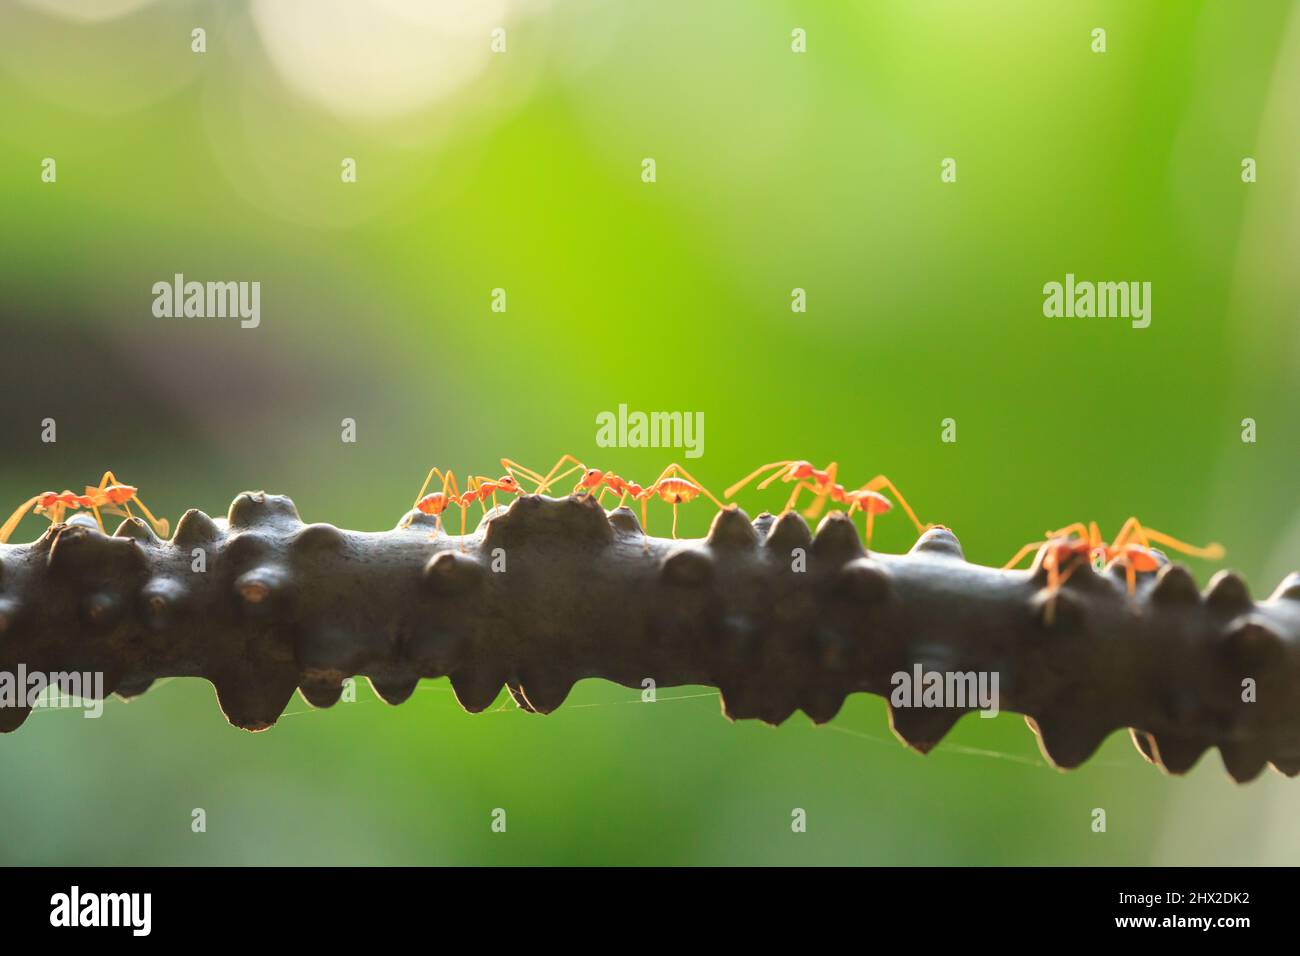 Weaver ants or green ants walk and transmit social signals on the branch, the sun setting in the background. Close-up. Stock Photo